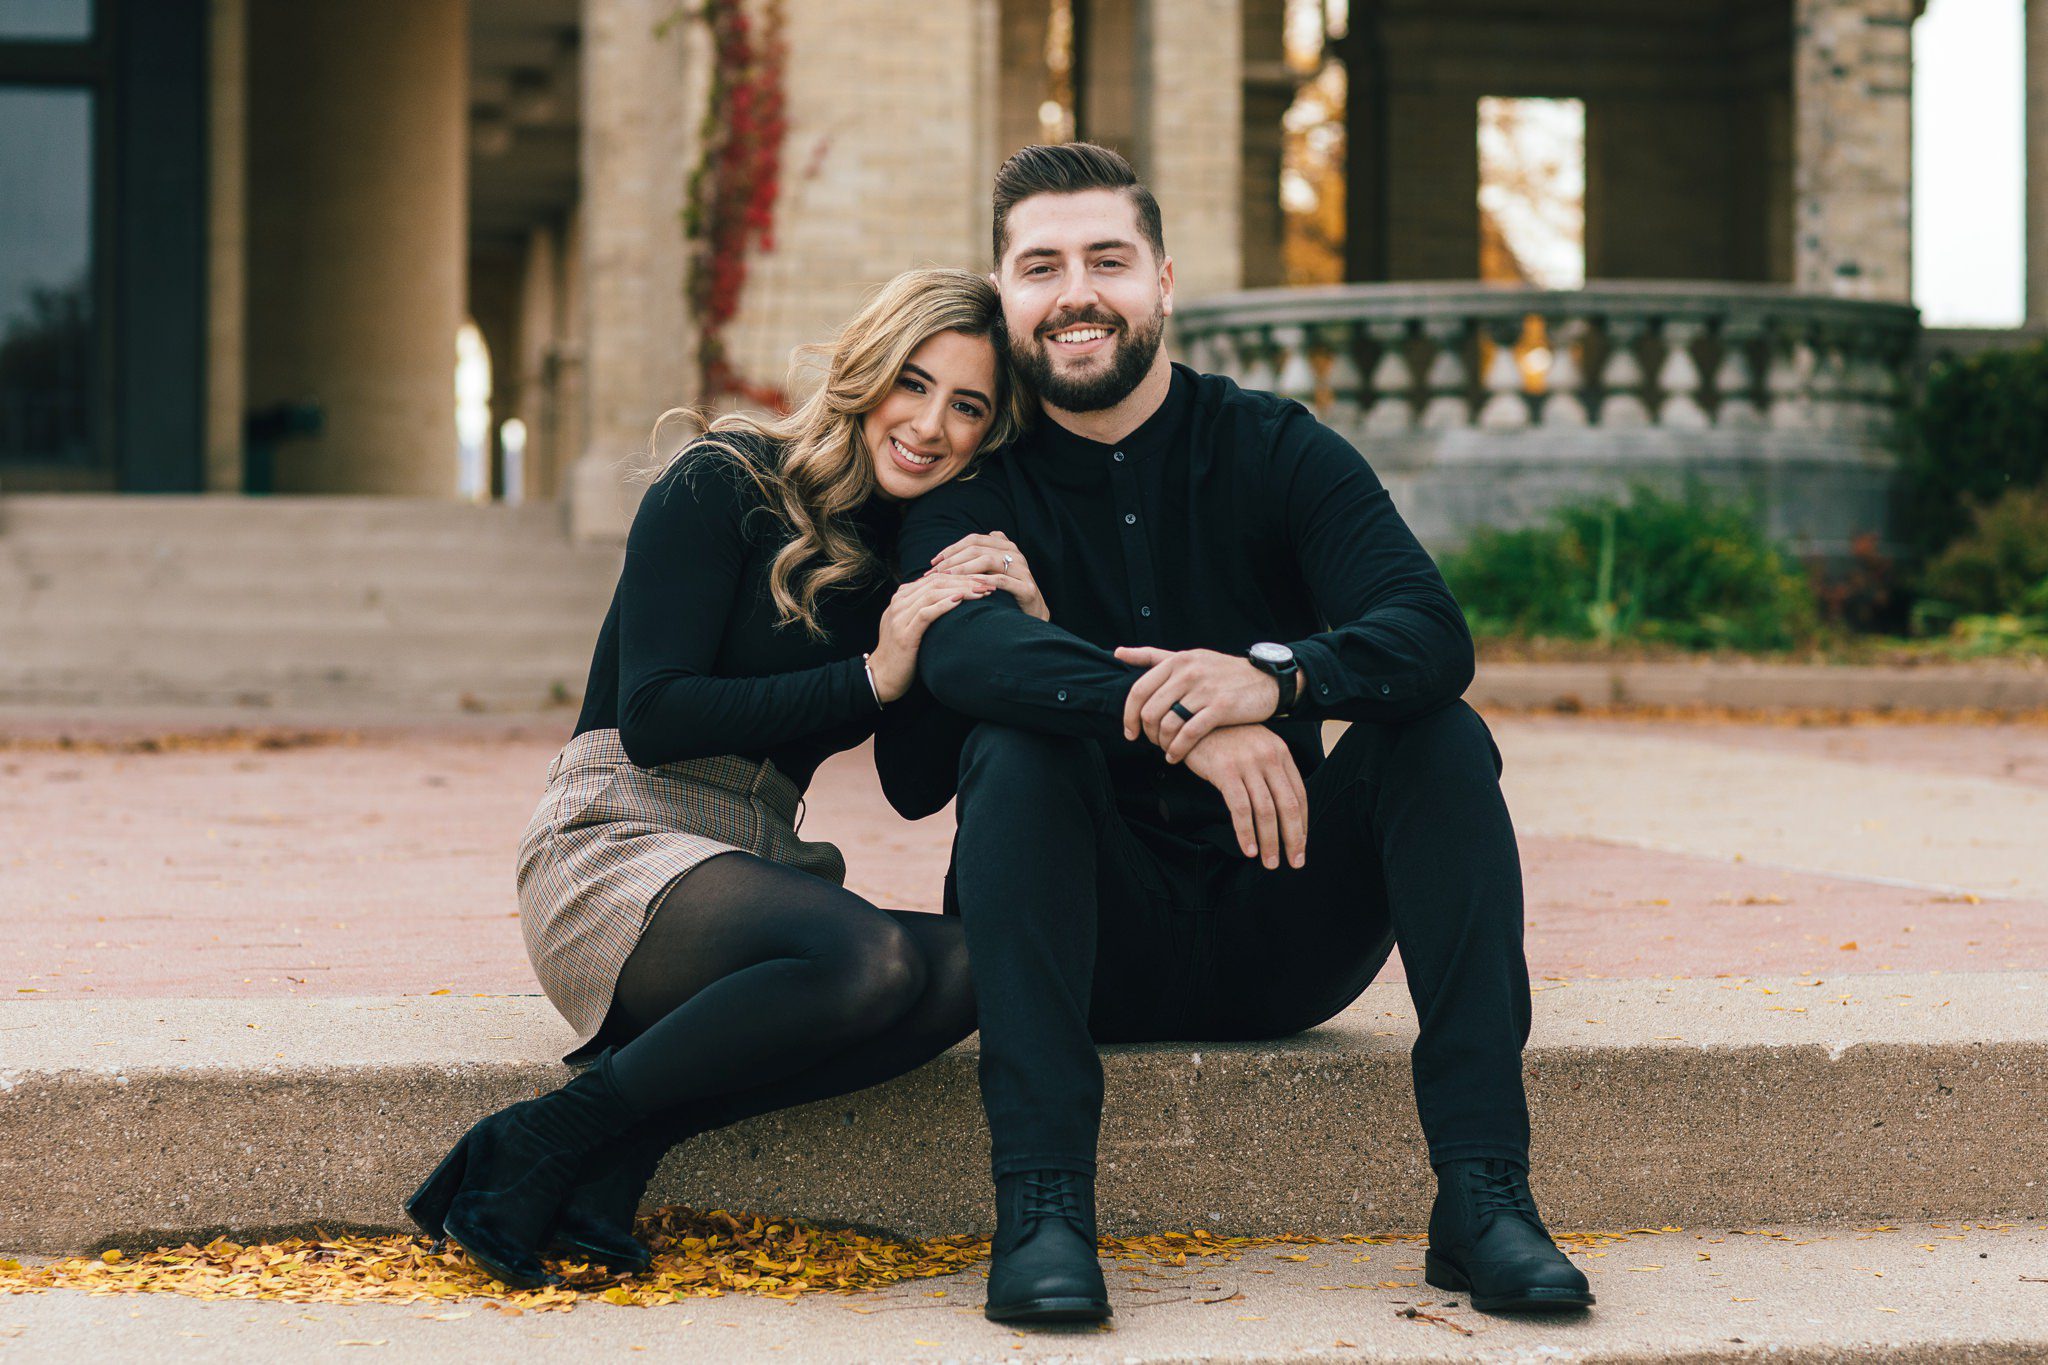 Belle Isle engagement session